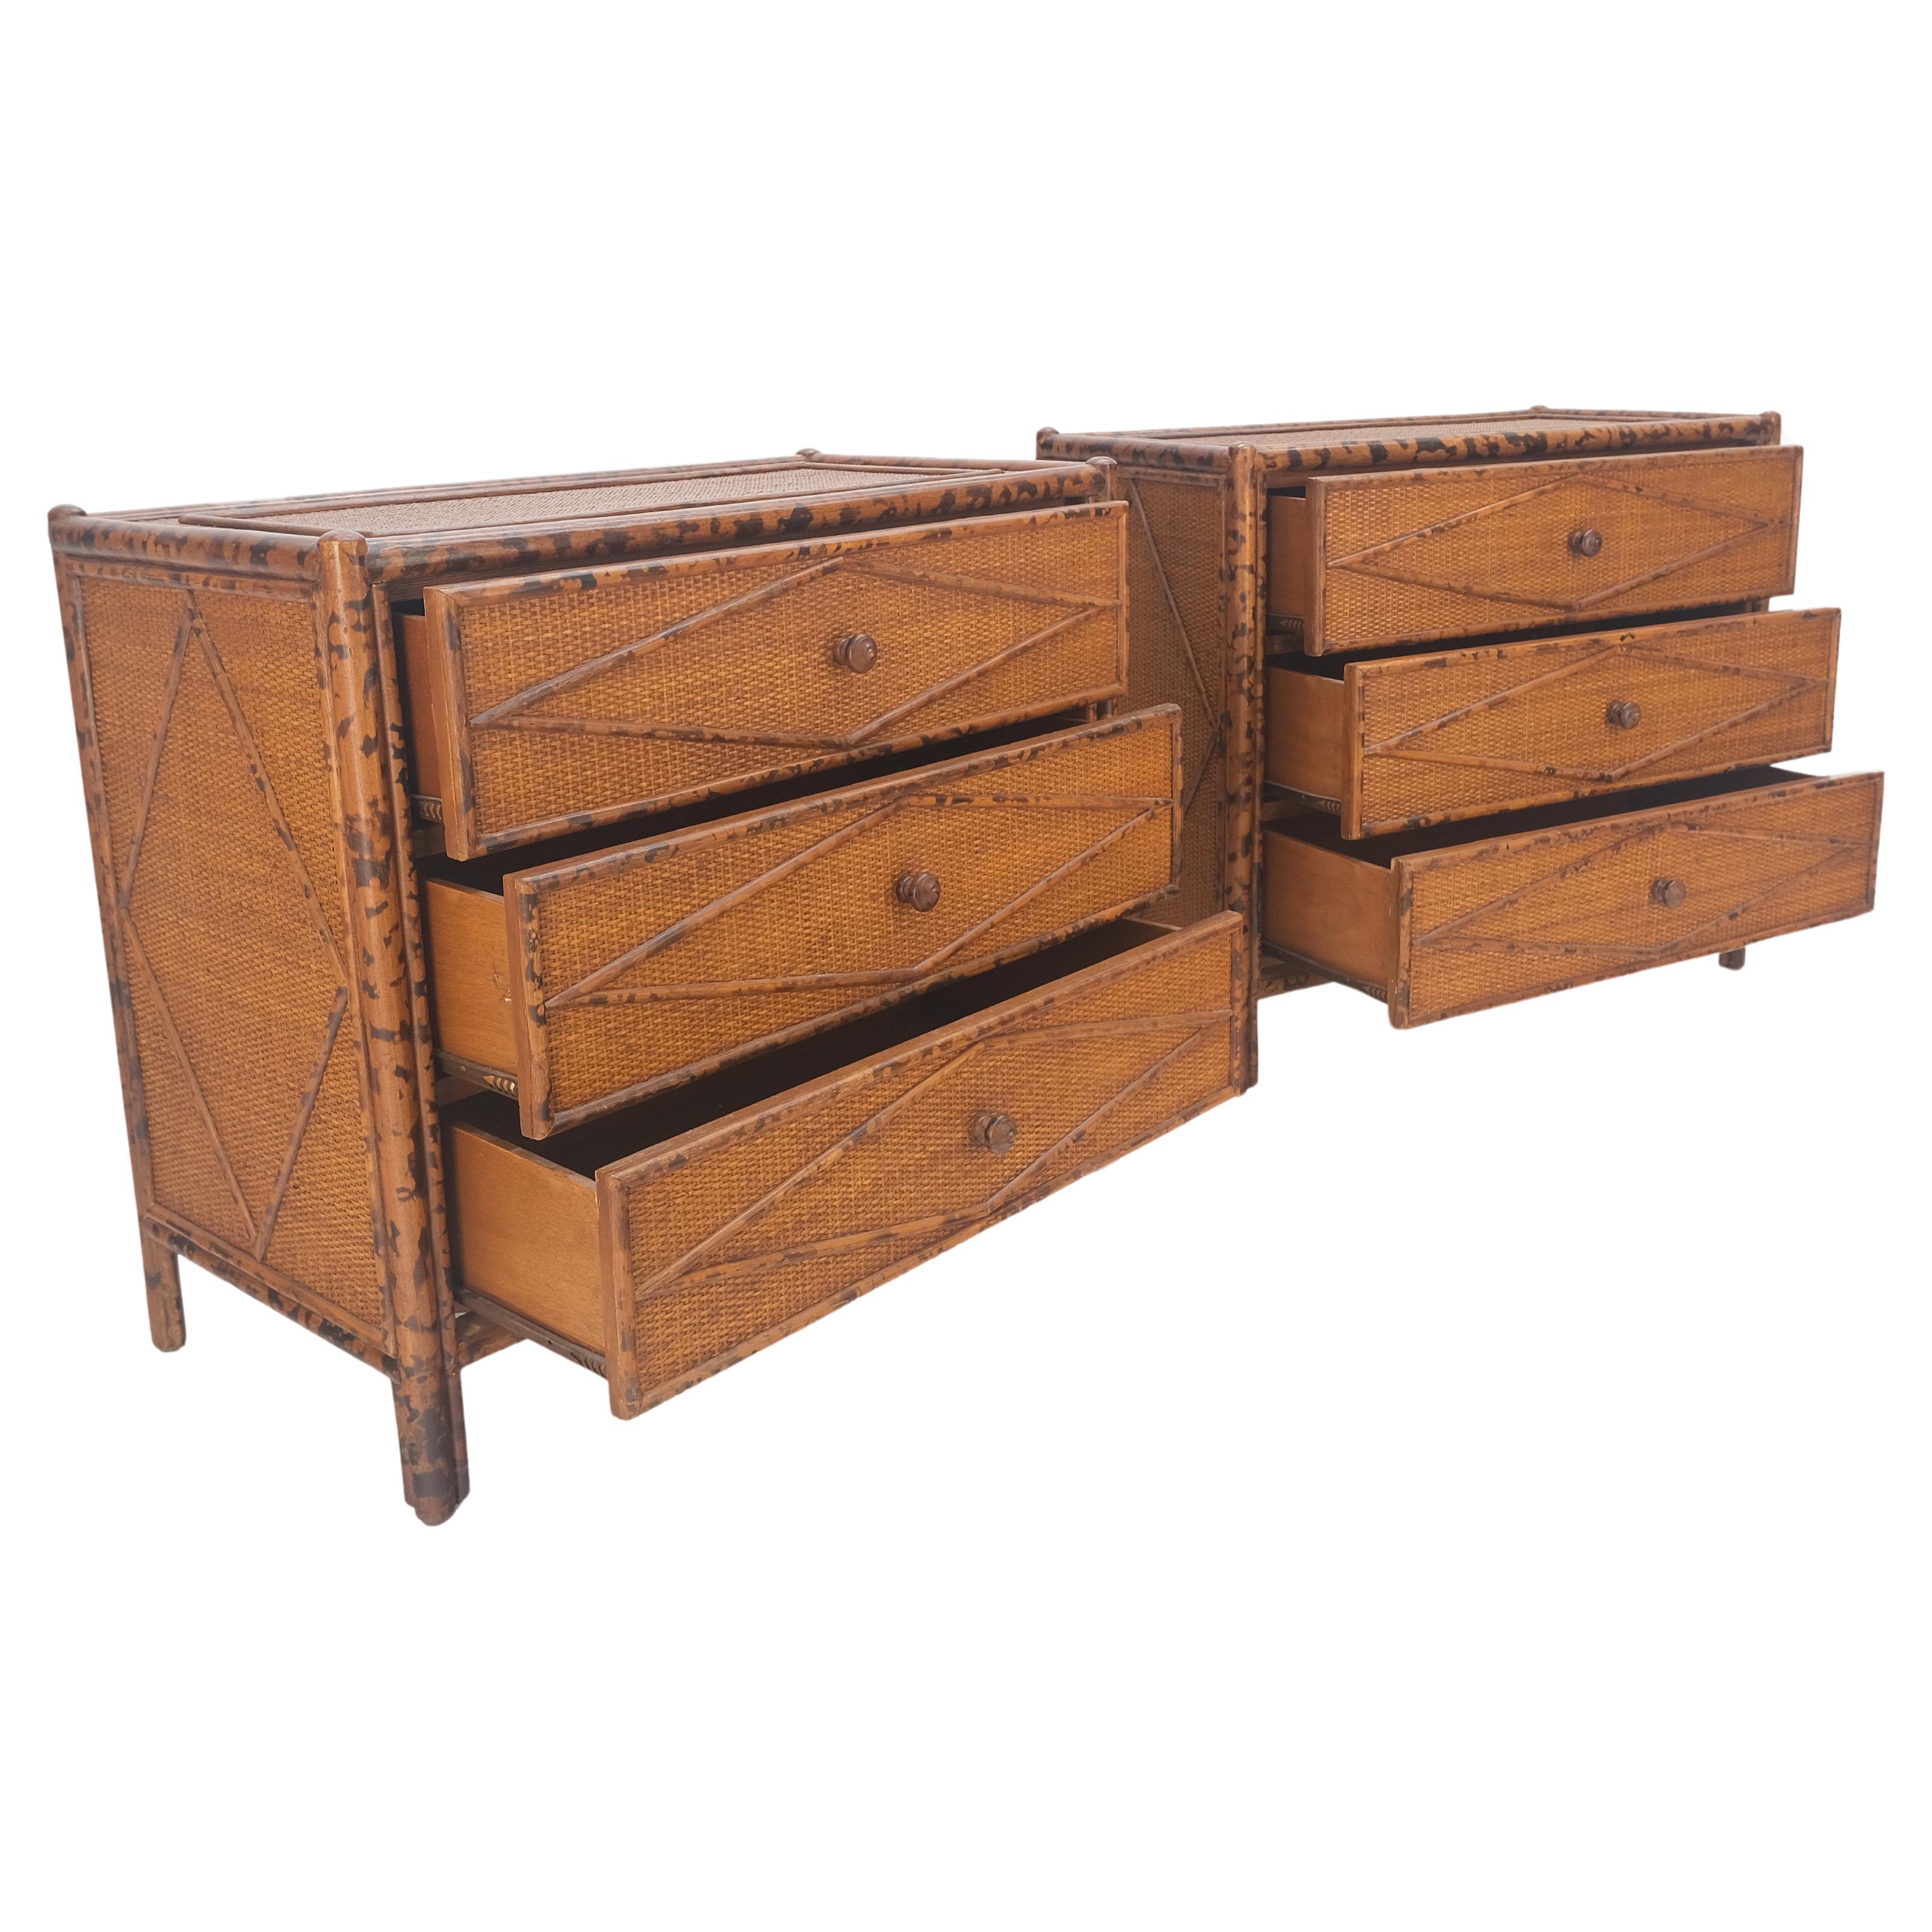 Bloomingdales Pair of Burnt Bamboo Cane 3 Drawers Cane Rattan Small Dressers Chests Night Stands MINT!